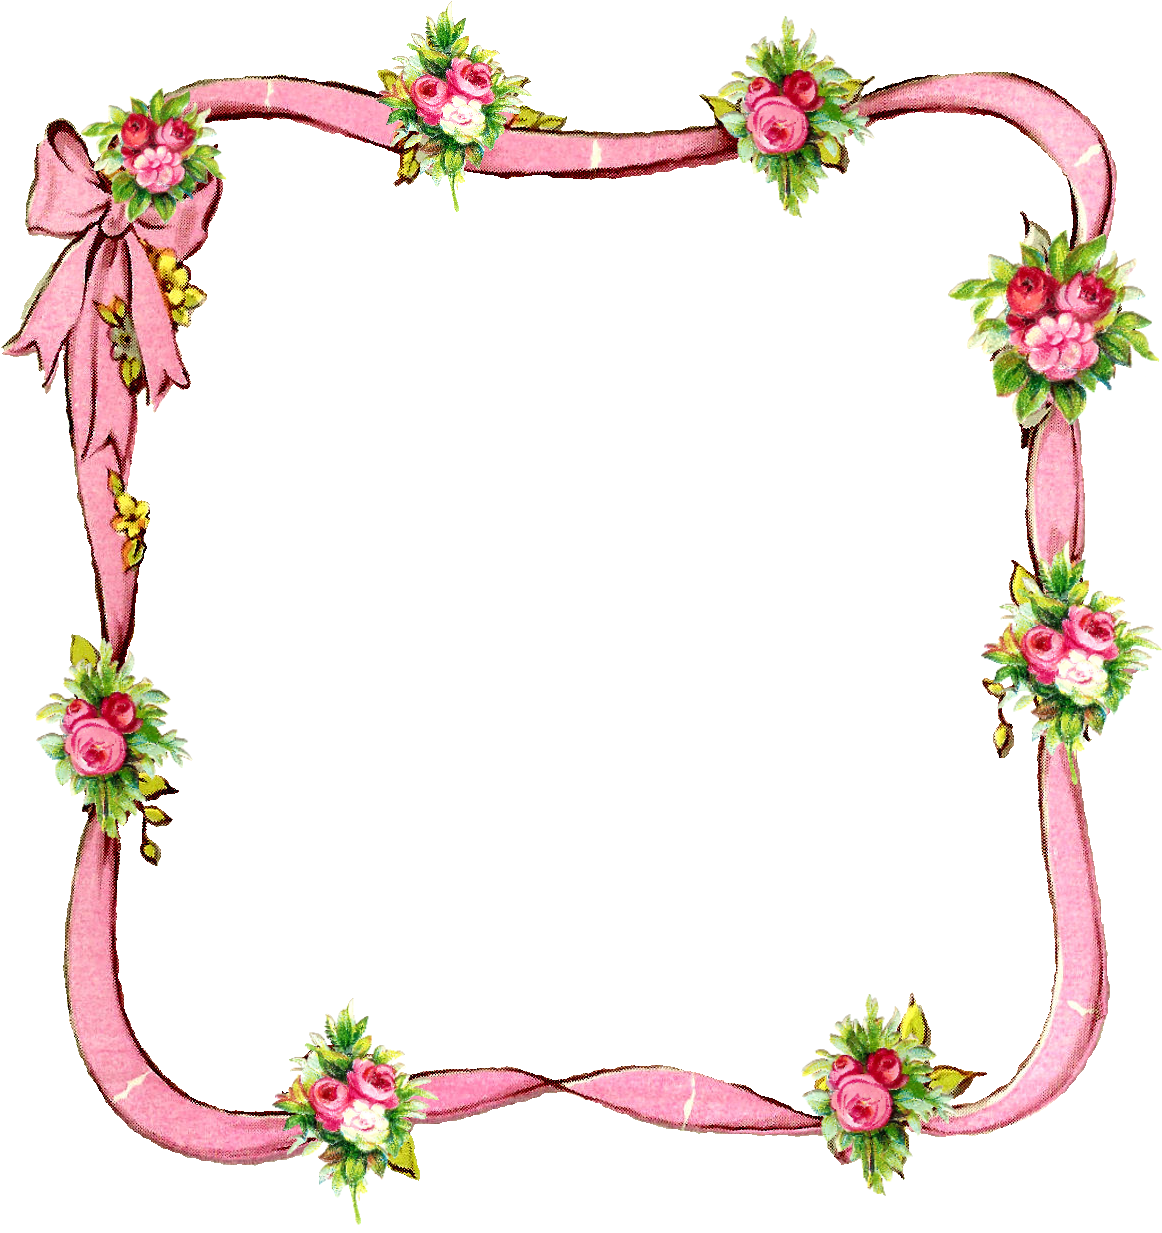 A Pink Ribbon With Flowers And A Bow